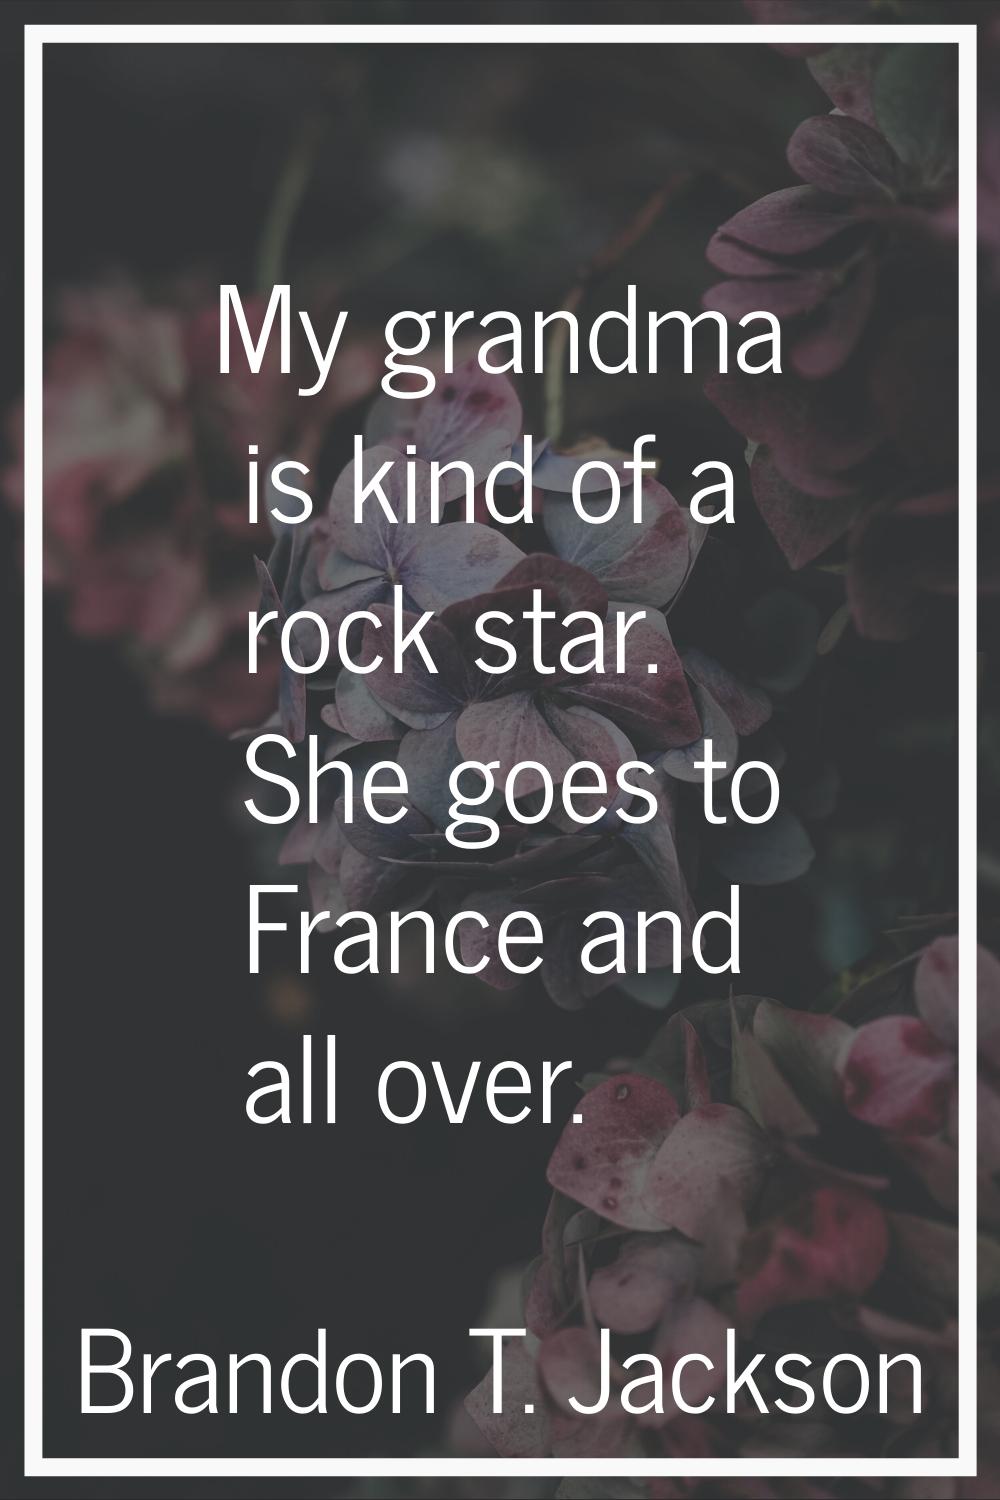 My grandma is kind of a rock star. She goes to France and all over.